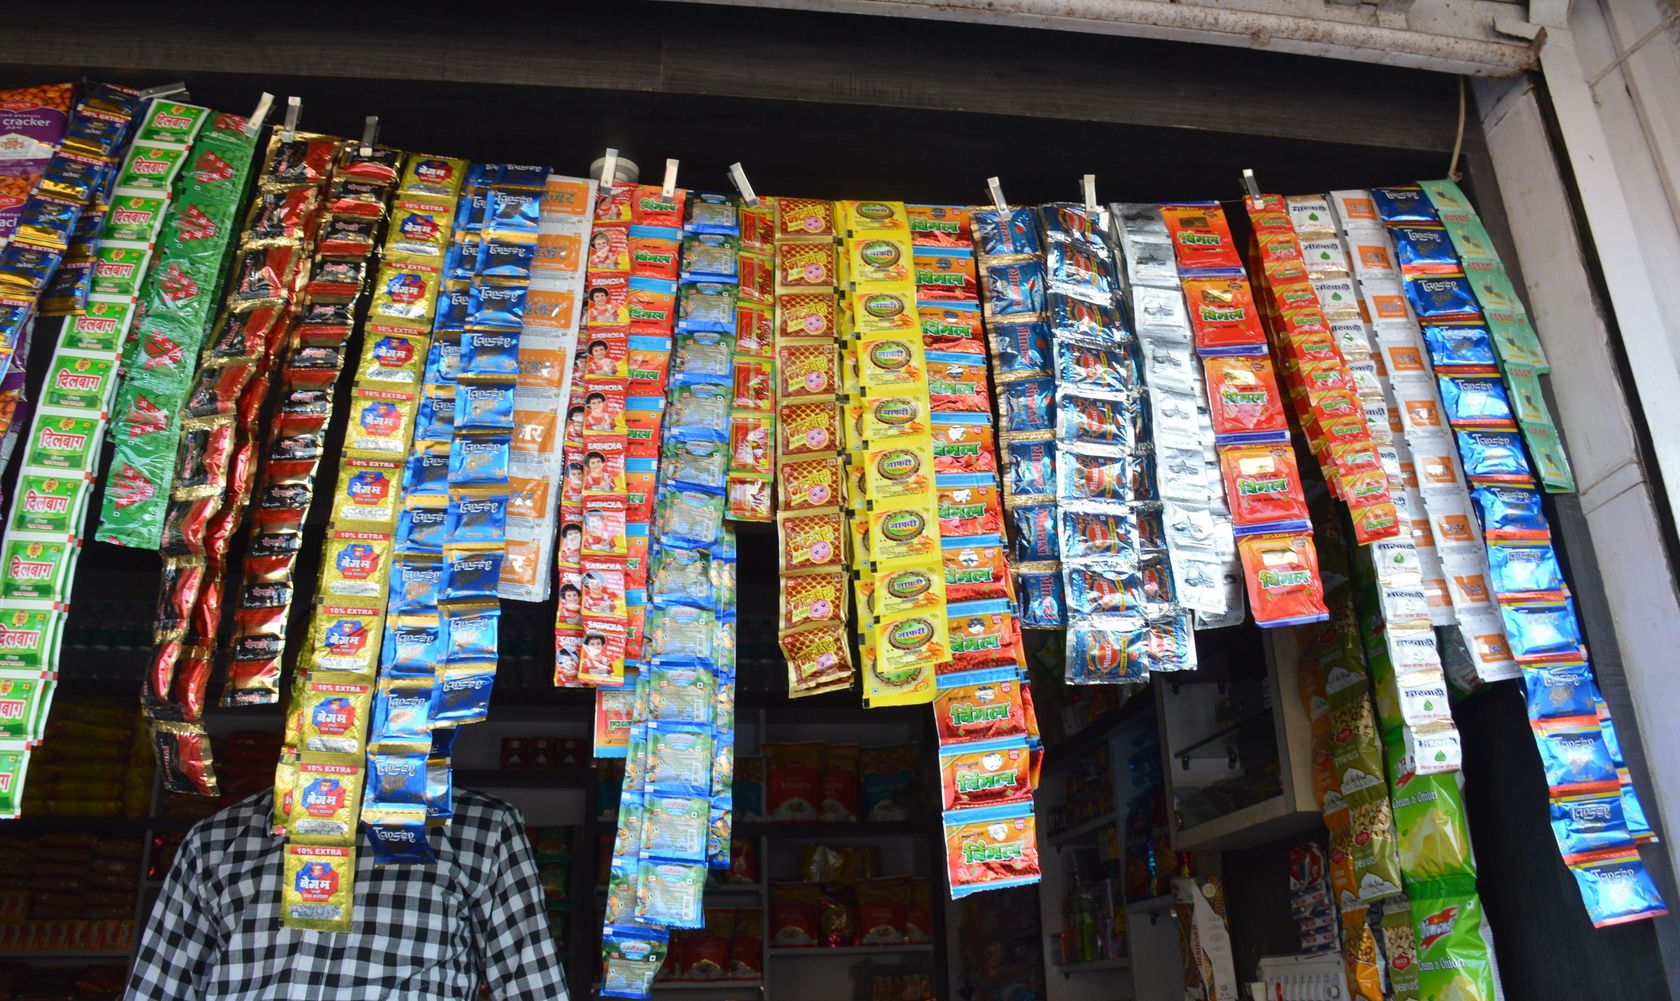 Pan Masala - Gutkha being sold across the state including Nagaur